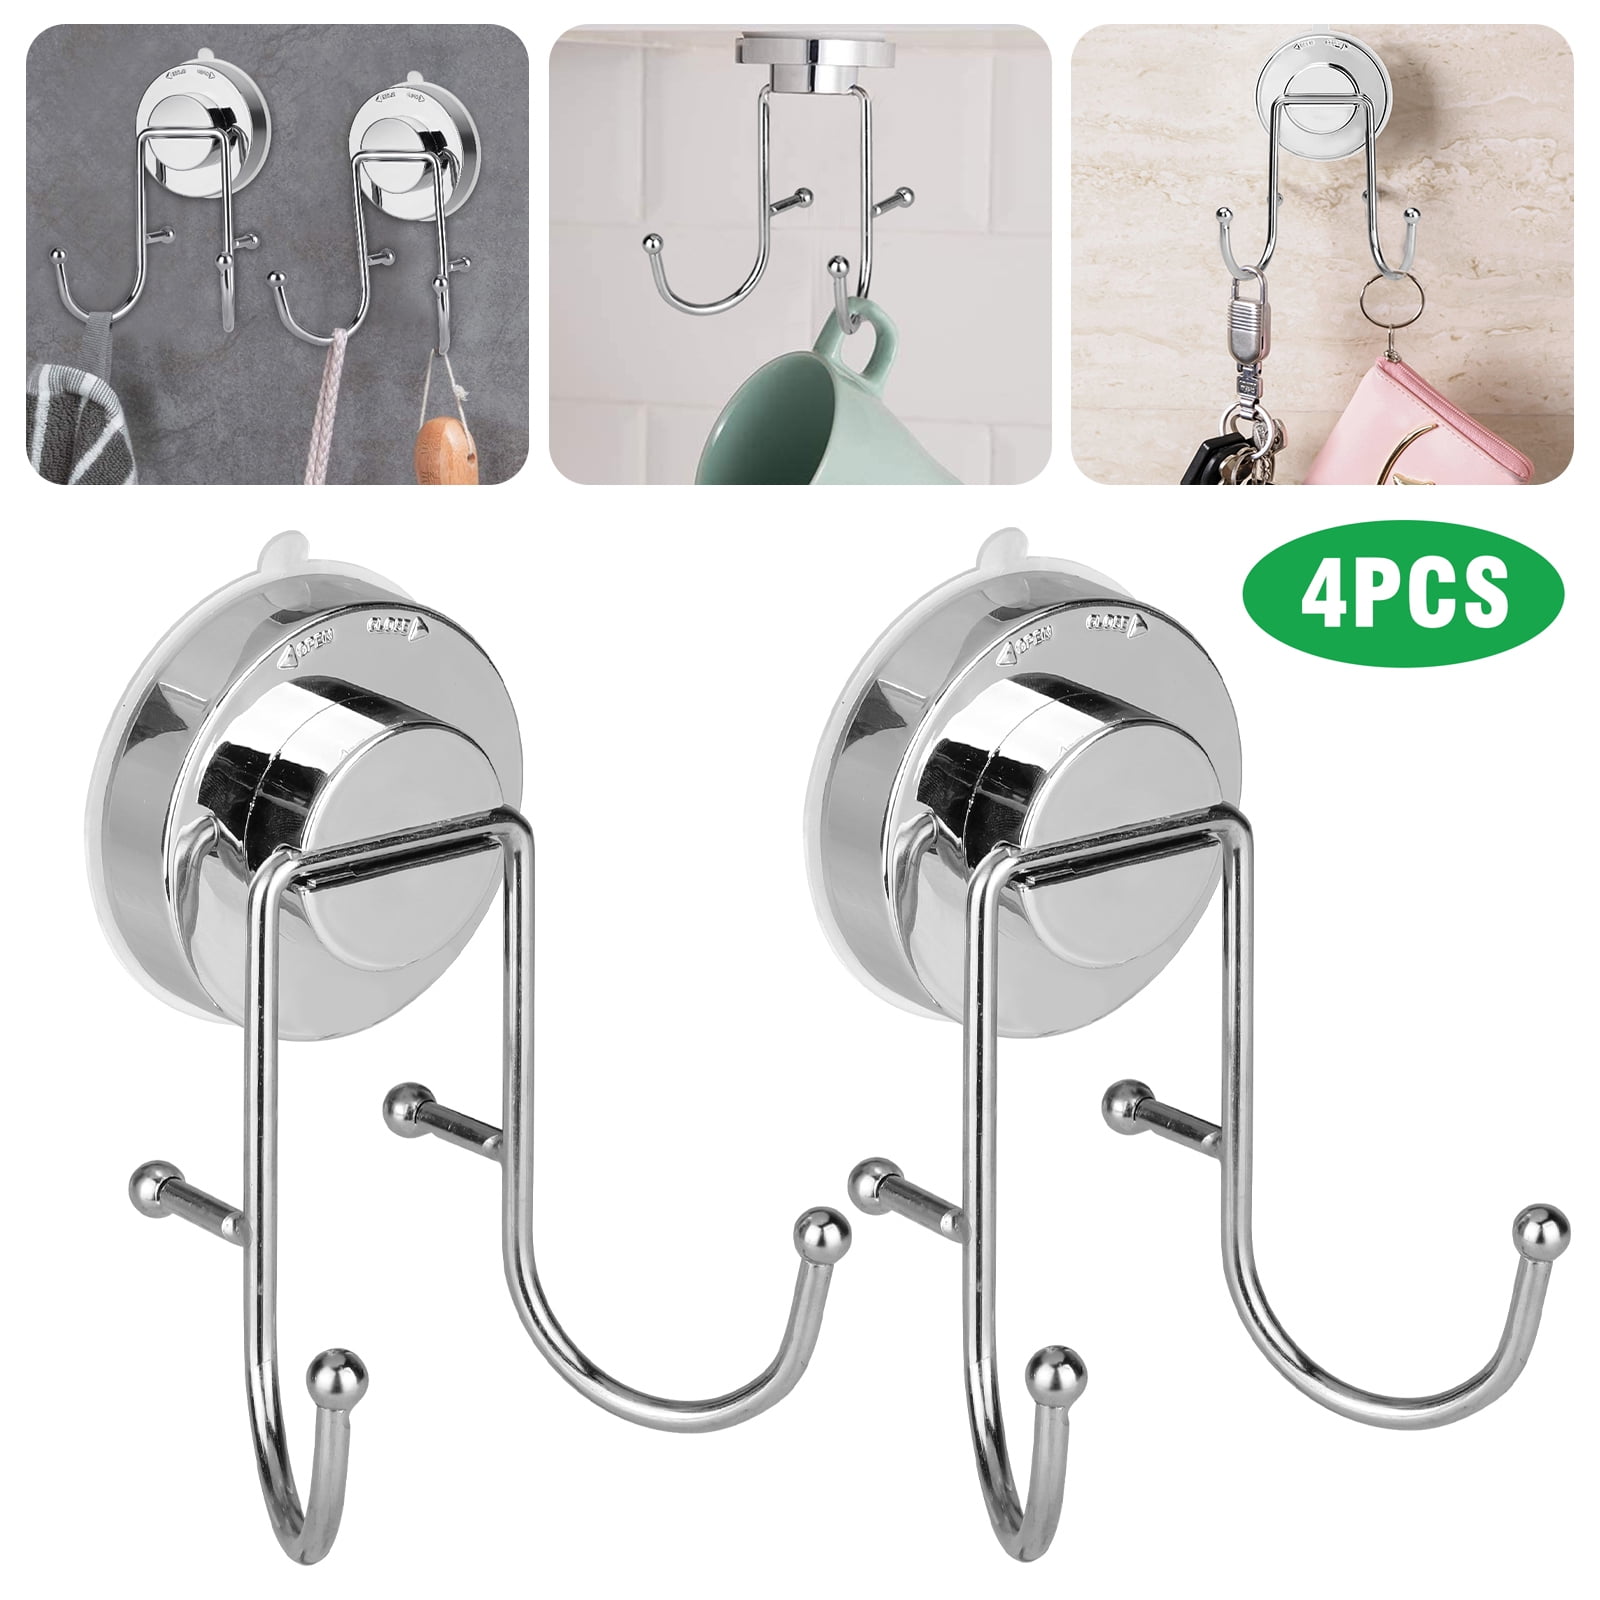 Strong Vacuum Suction Cup Hook Shower Holder Hooks Kitchen For Bathroom  Fast 